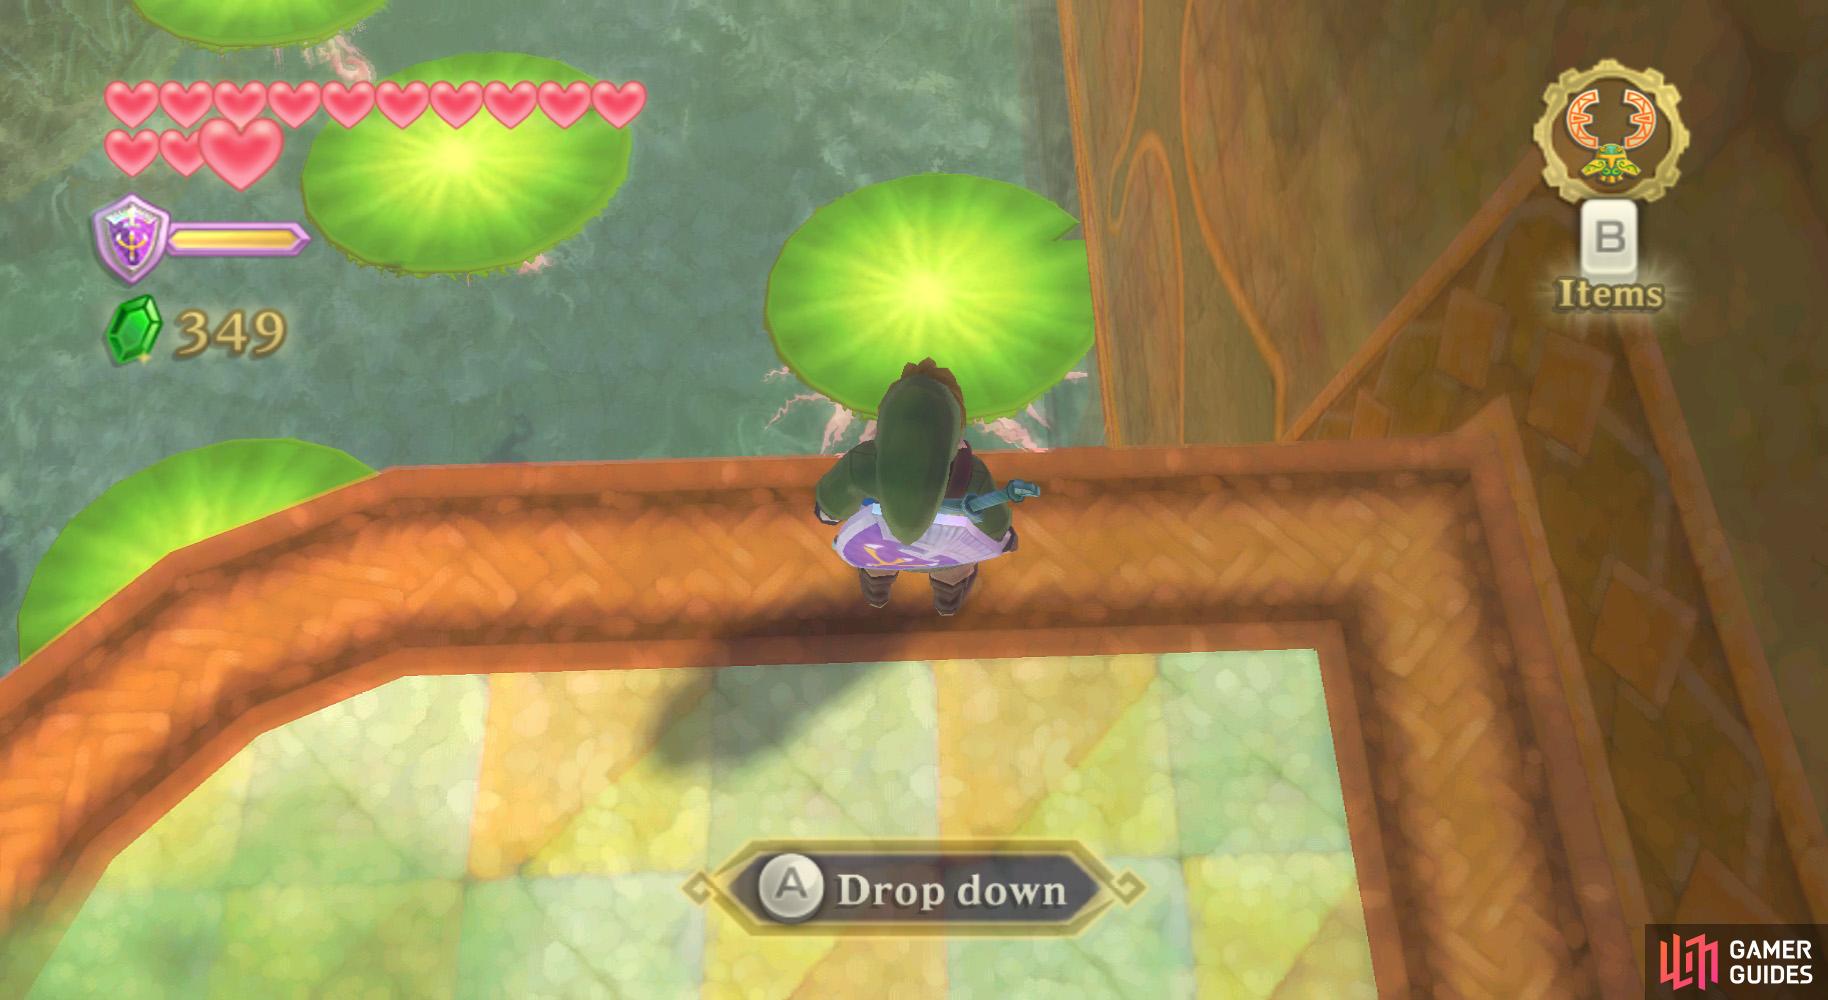 Jump down and flip this lilypad upside down.